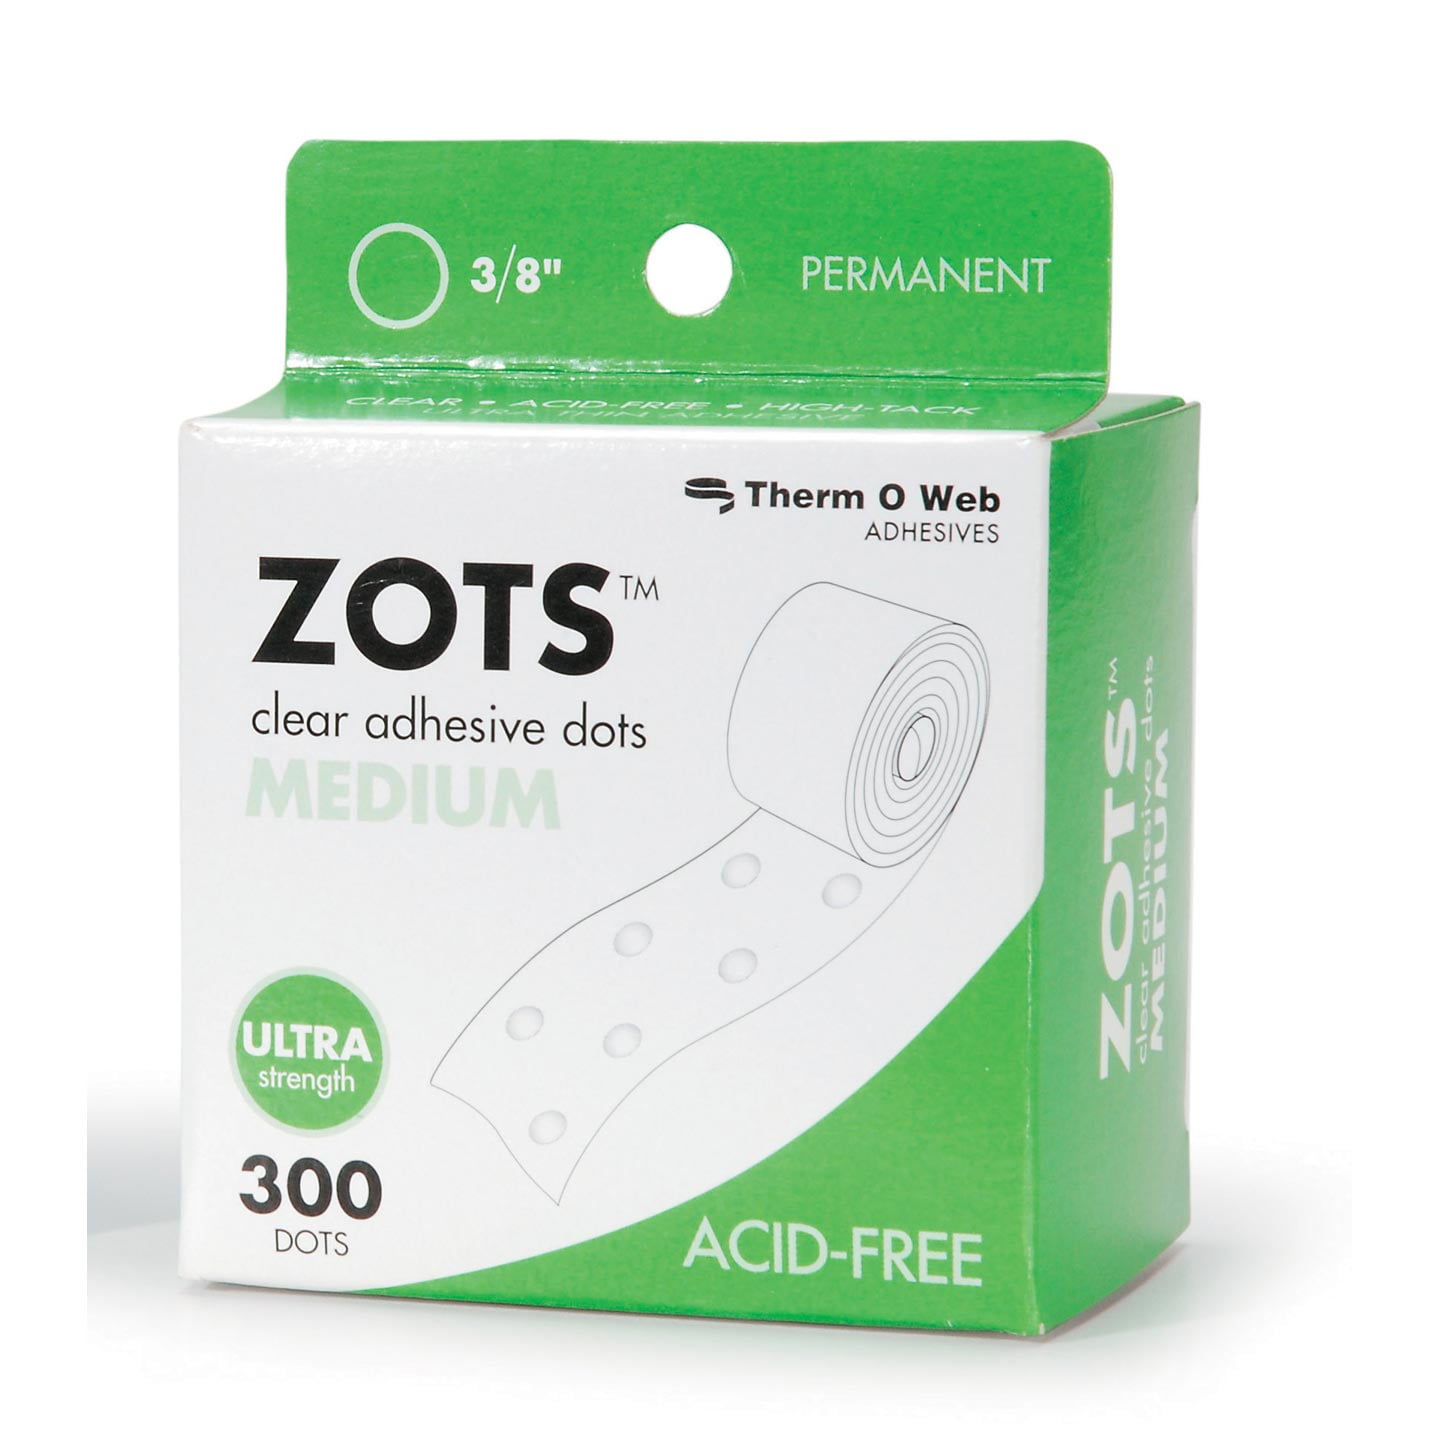 Zots Adhesive Dots Medium .375In Diam .015In Thick 300Ct Rol